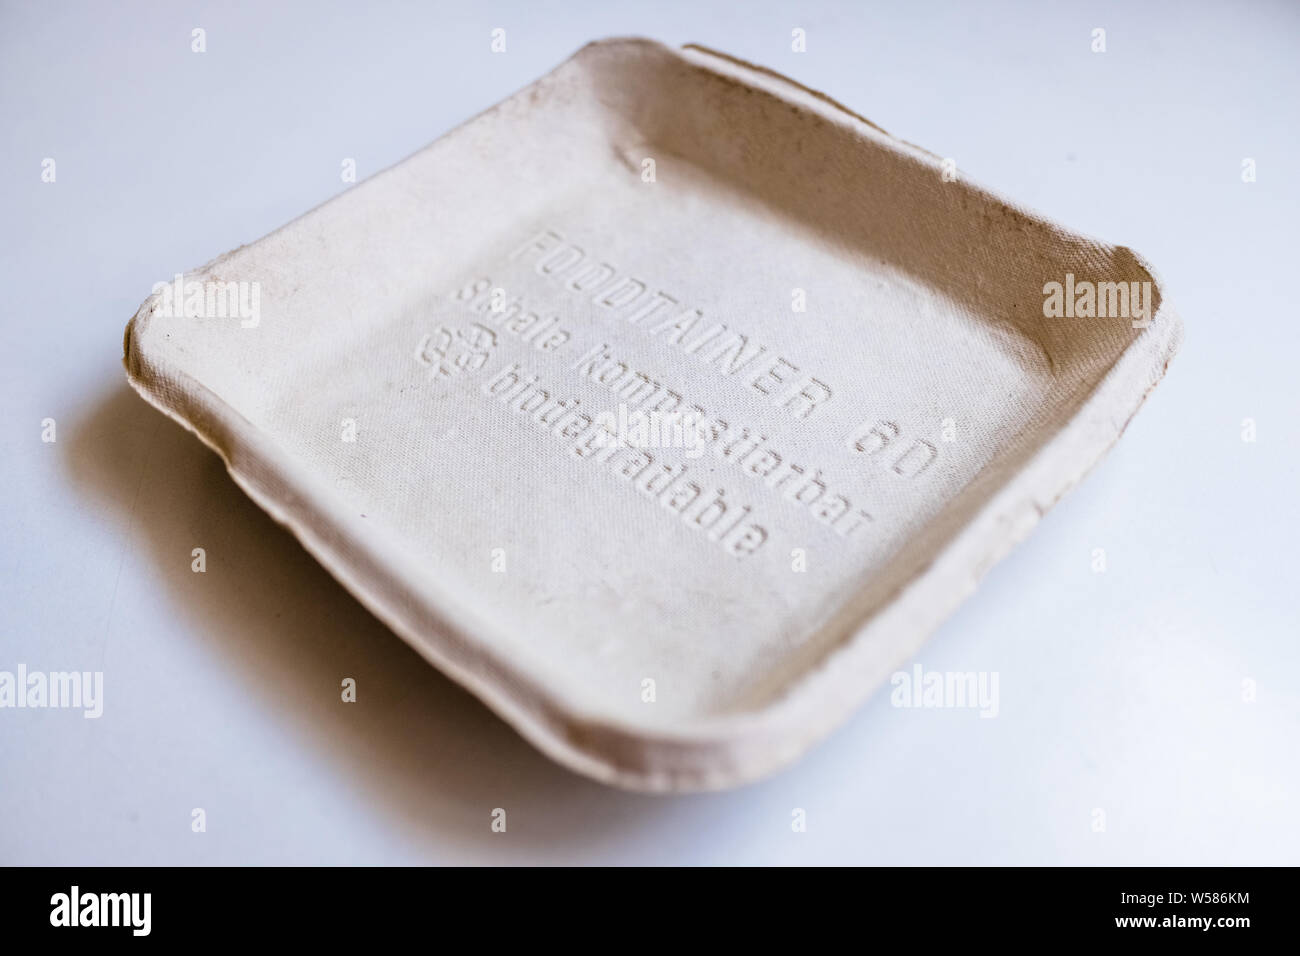 Valencia, Spain - July 25, 20189: Recycled cardboard food container, suitable for composting. Stock Photo